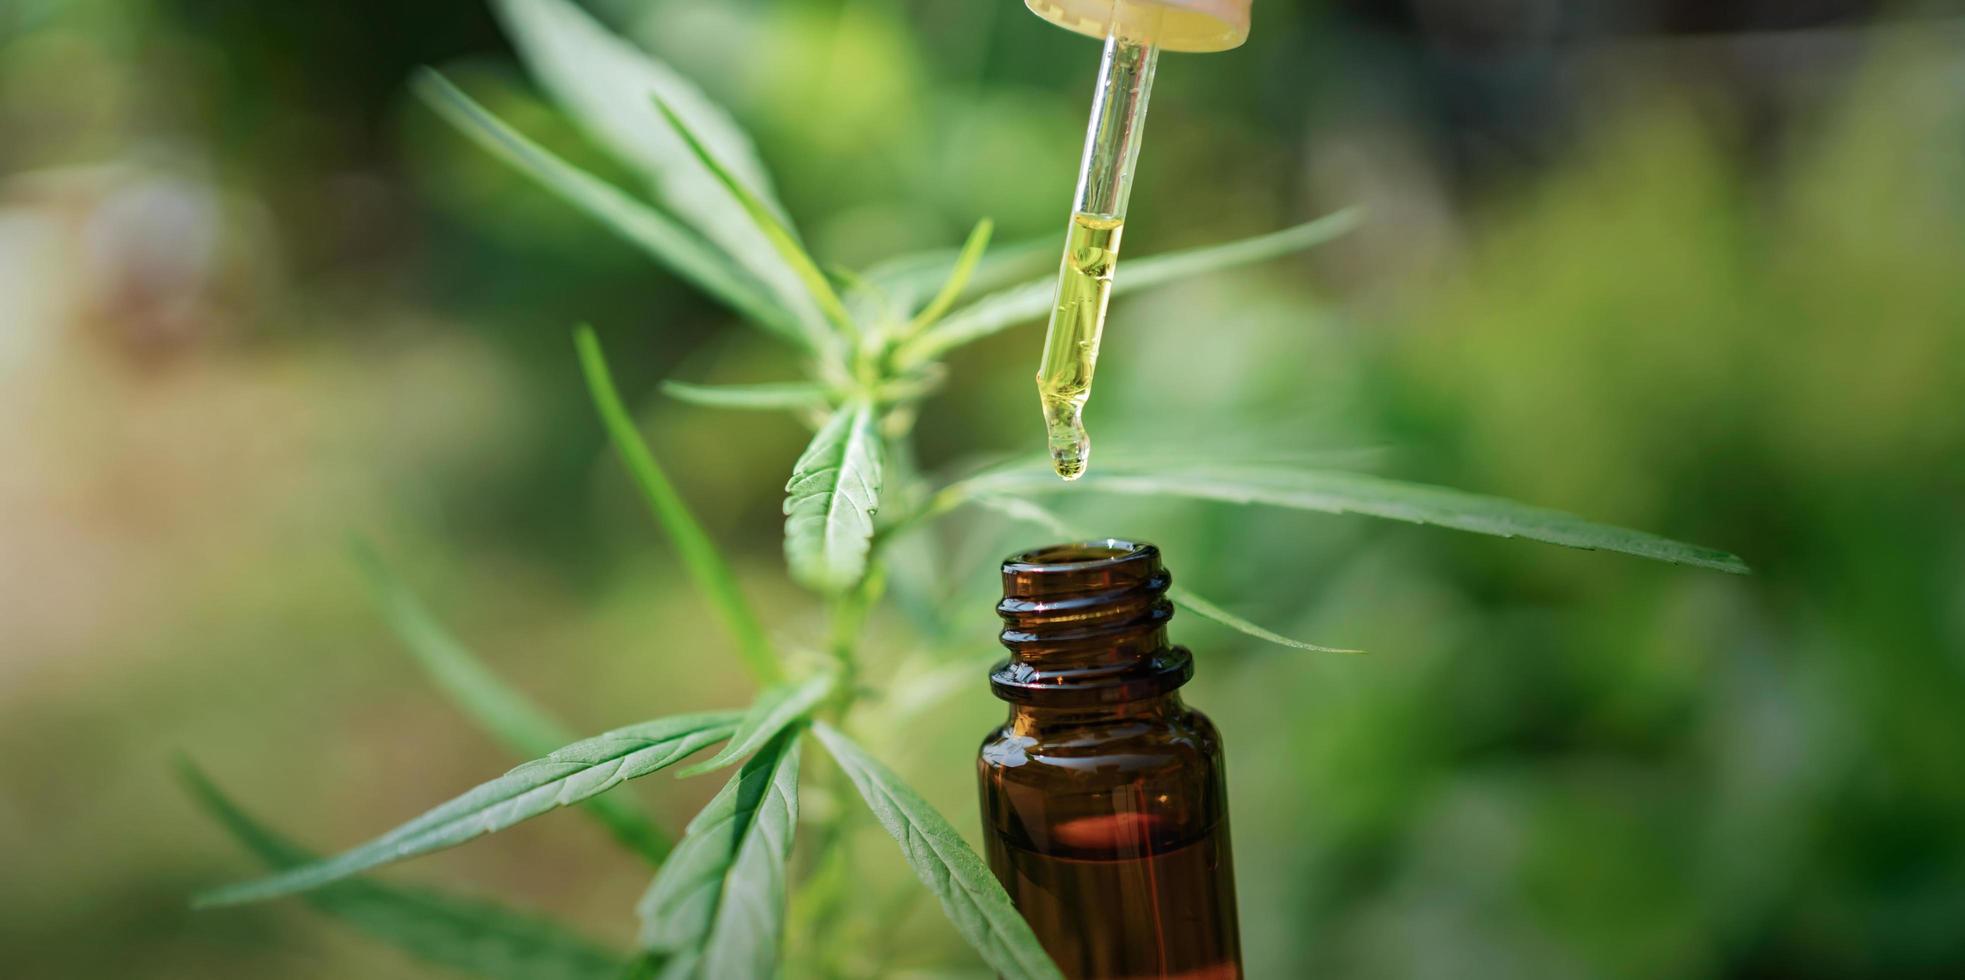 hemp oil dropper in bottle with cannabis tree background photo